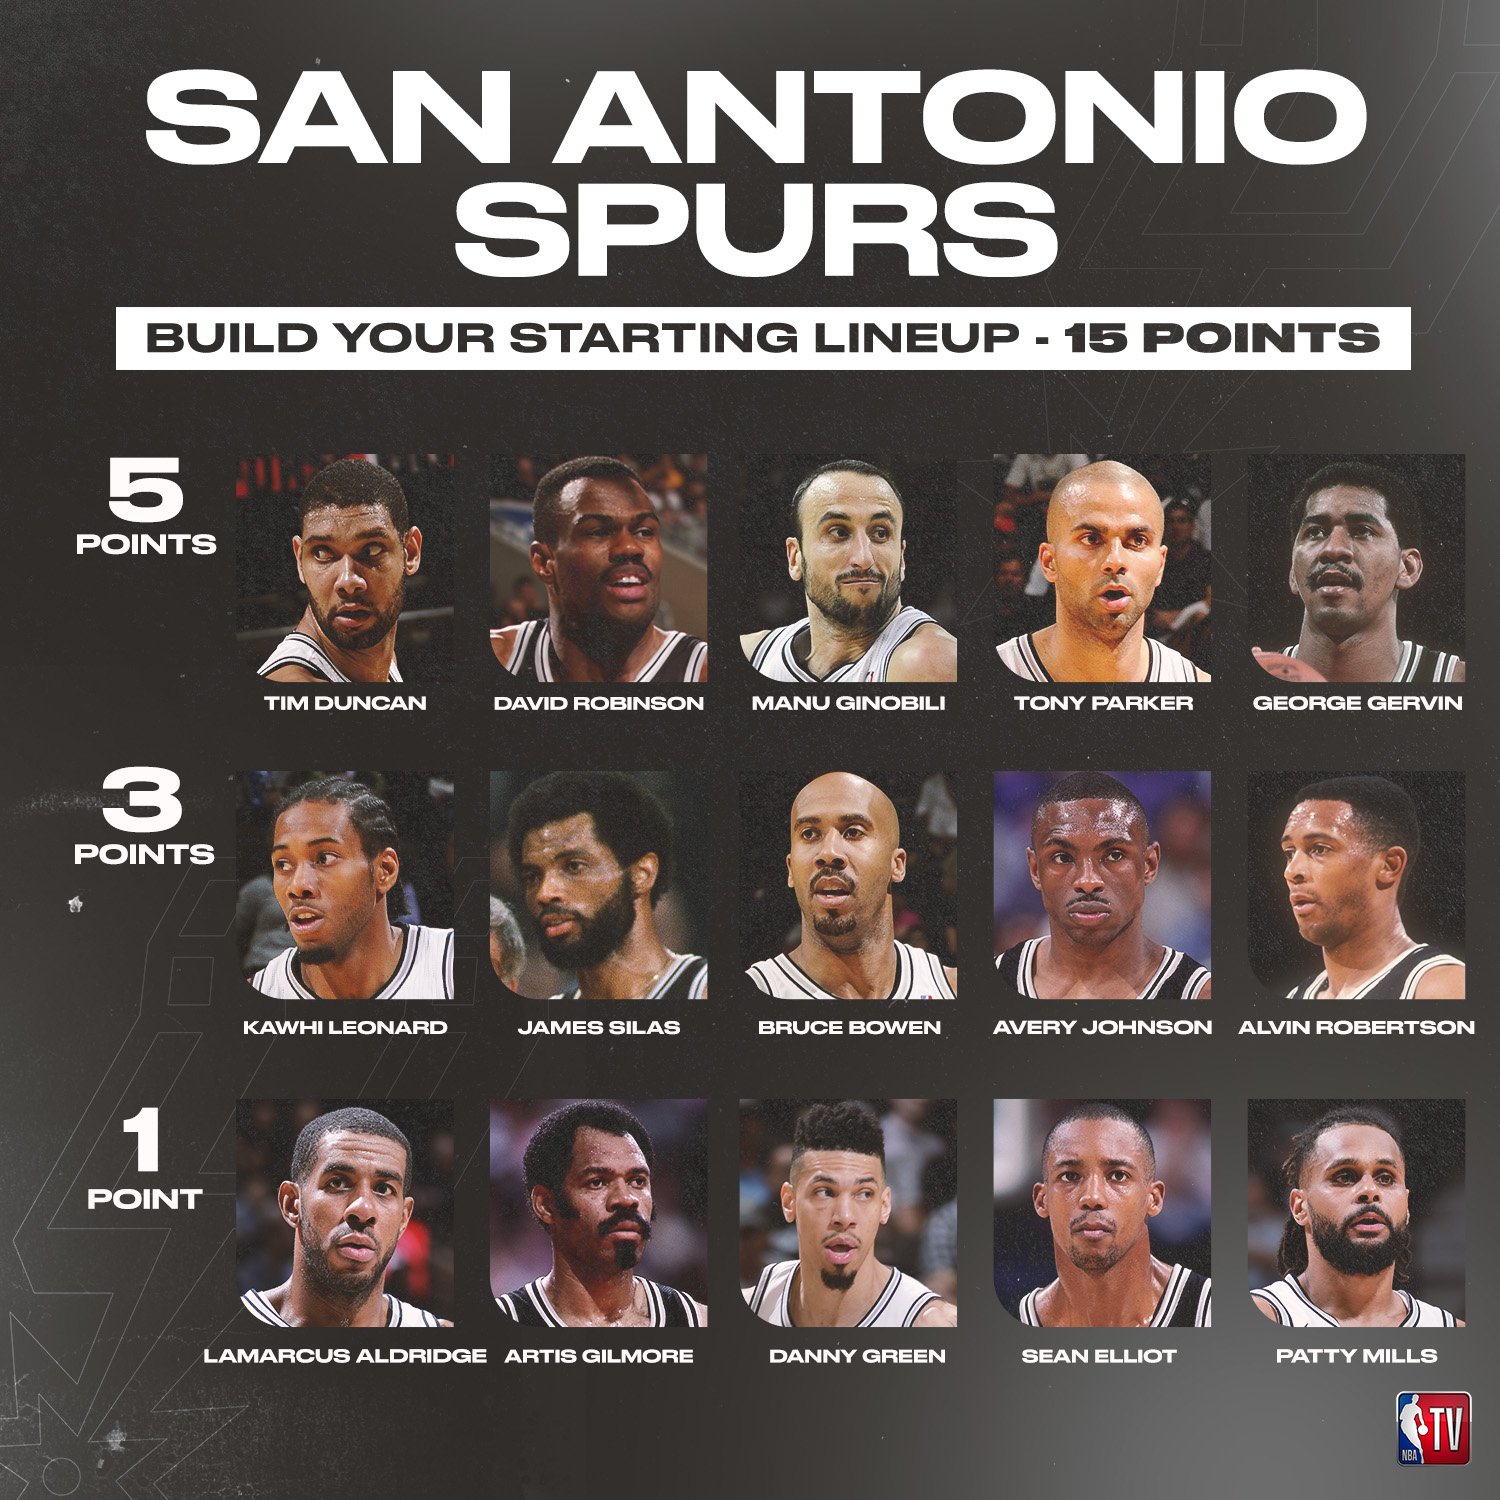 You have $15 to build your Spurs starting 5 : r/NBASpurs